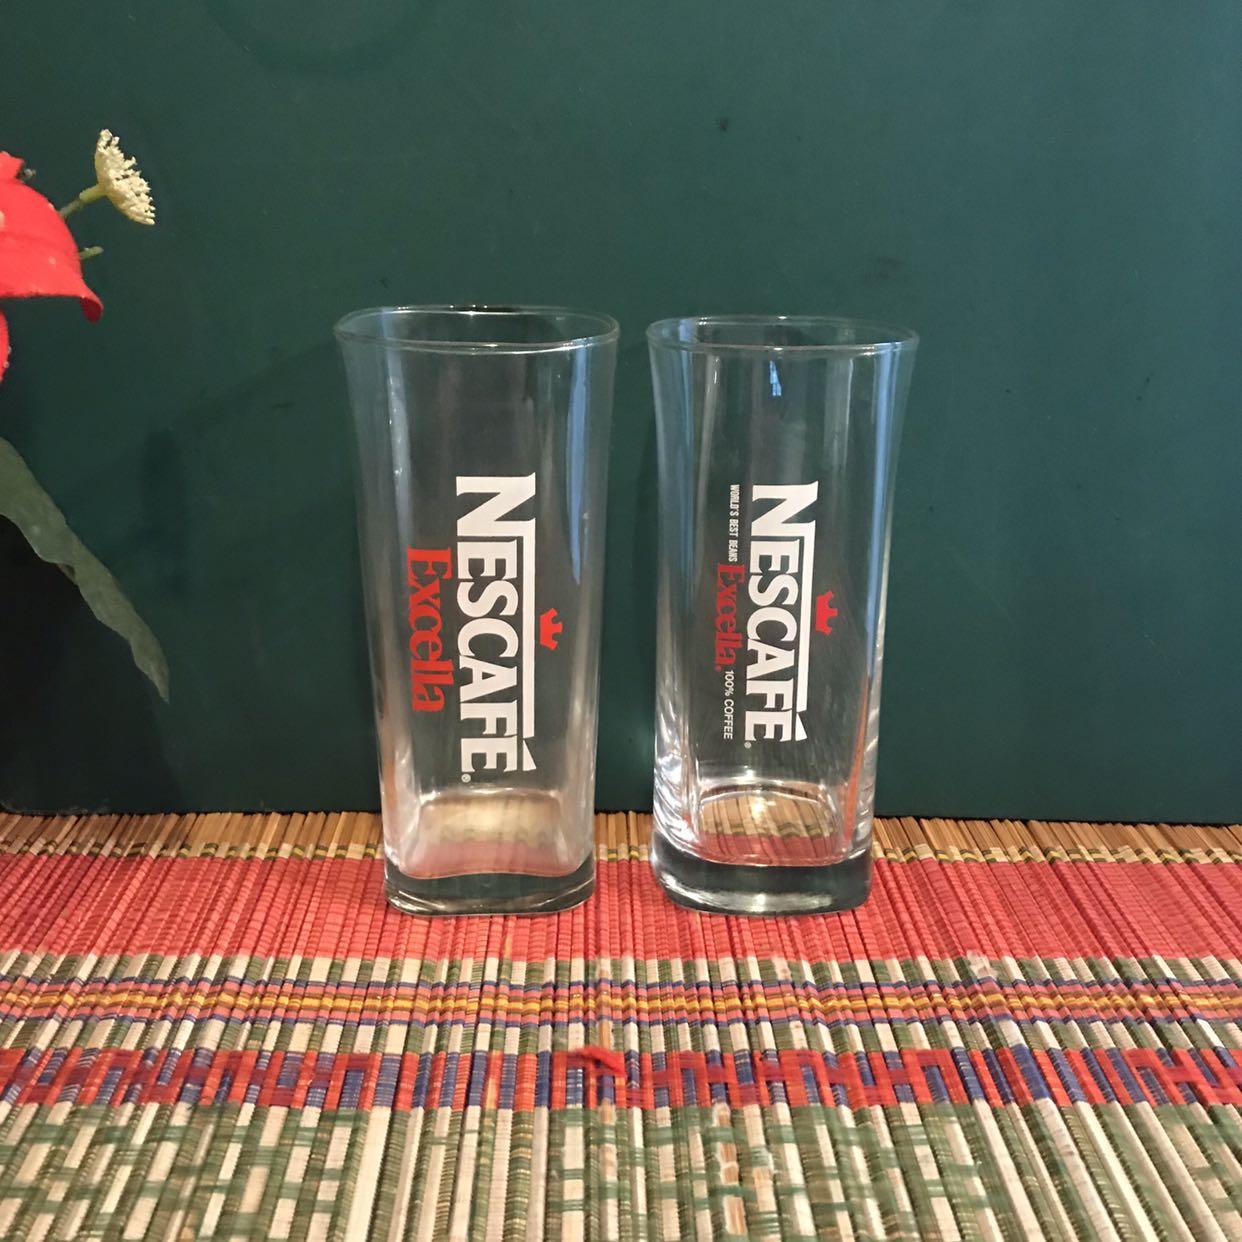 Nespresso Glass Cup, Furniture & Home Living, Home Decor, Vases &  Decorative Bowls on Carousell